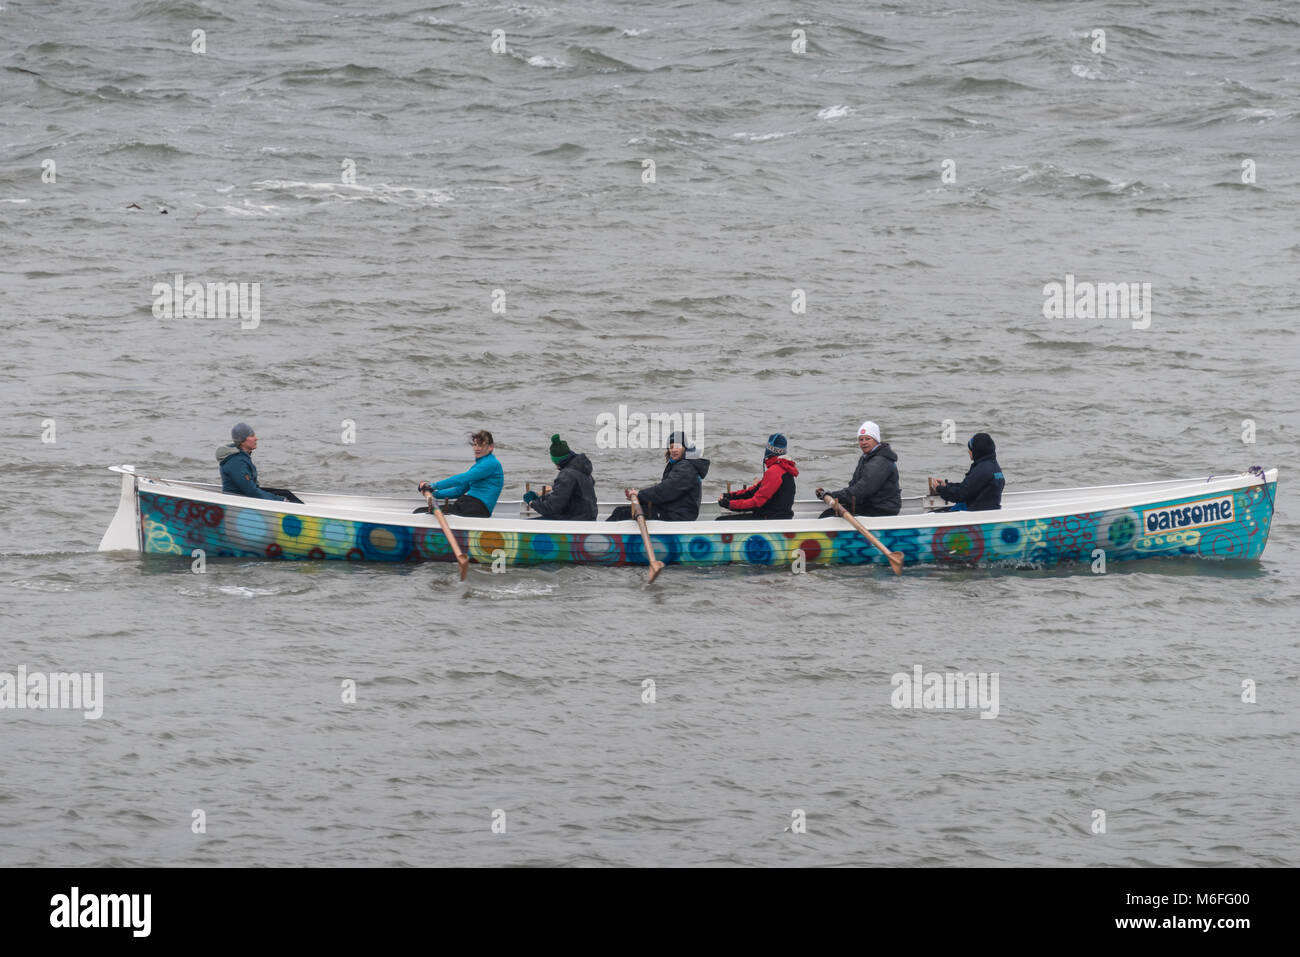 UK Weather - The Appledore Ladies Gig Crew brave the choppy conditions on the River Torridge in the aftermath of storm Emma in North Devon. Stock Photo